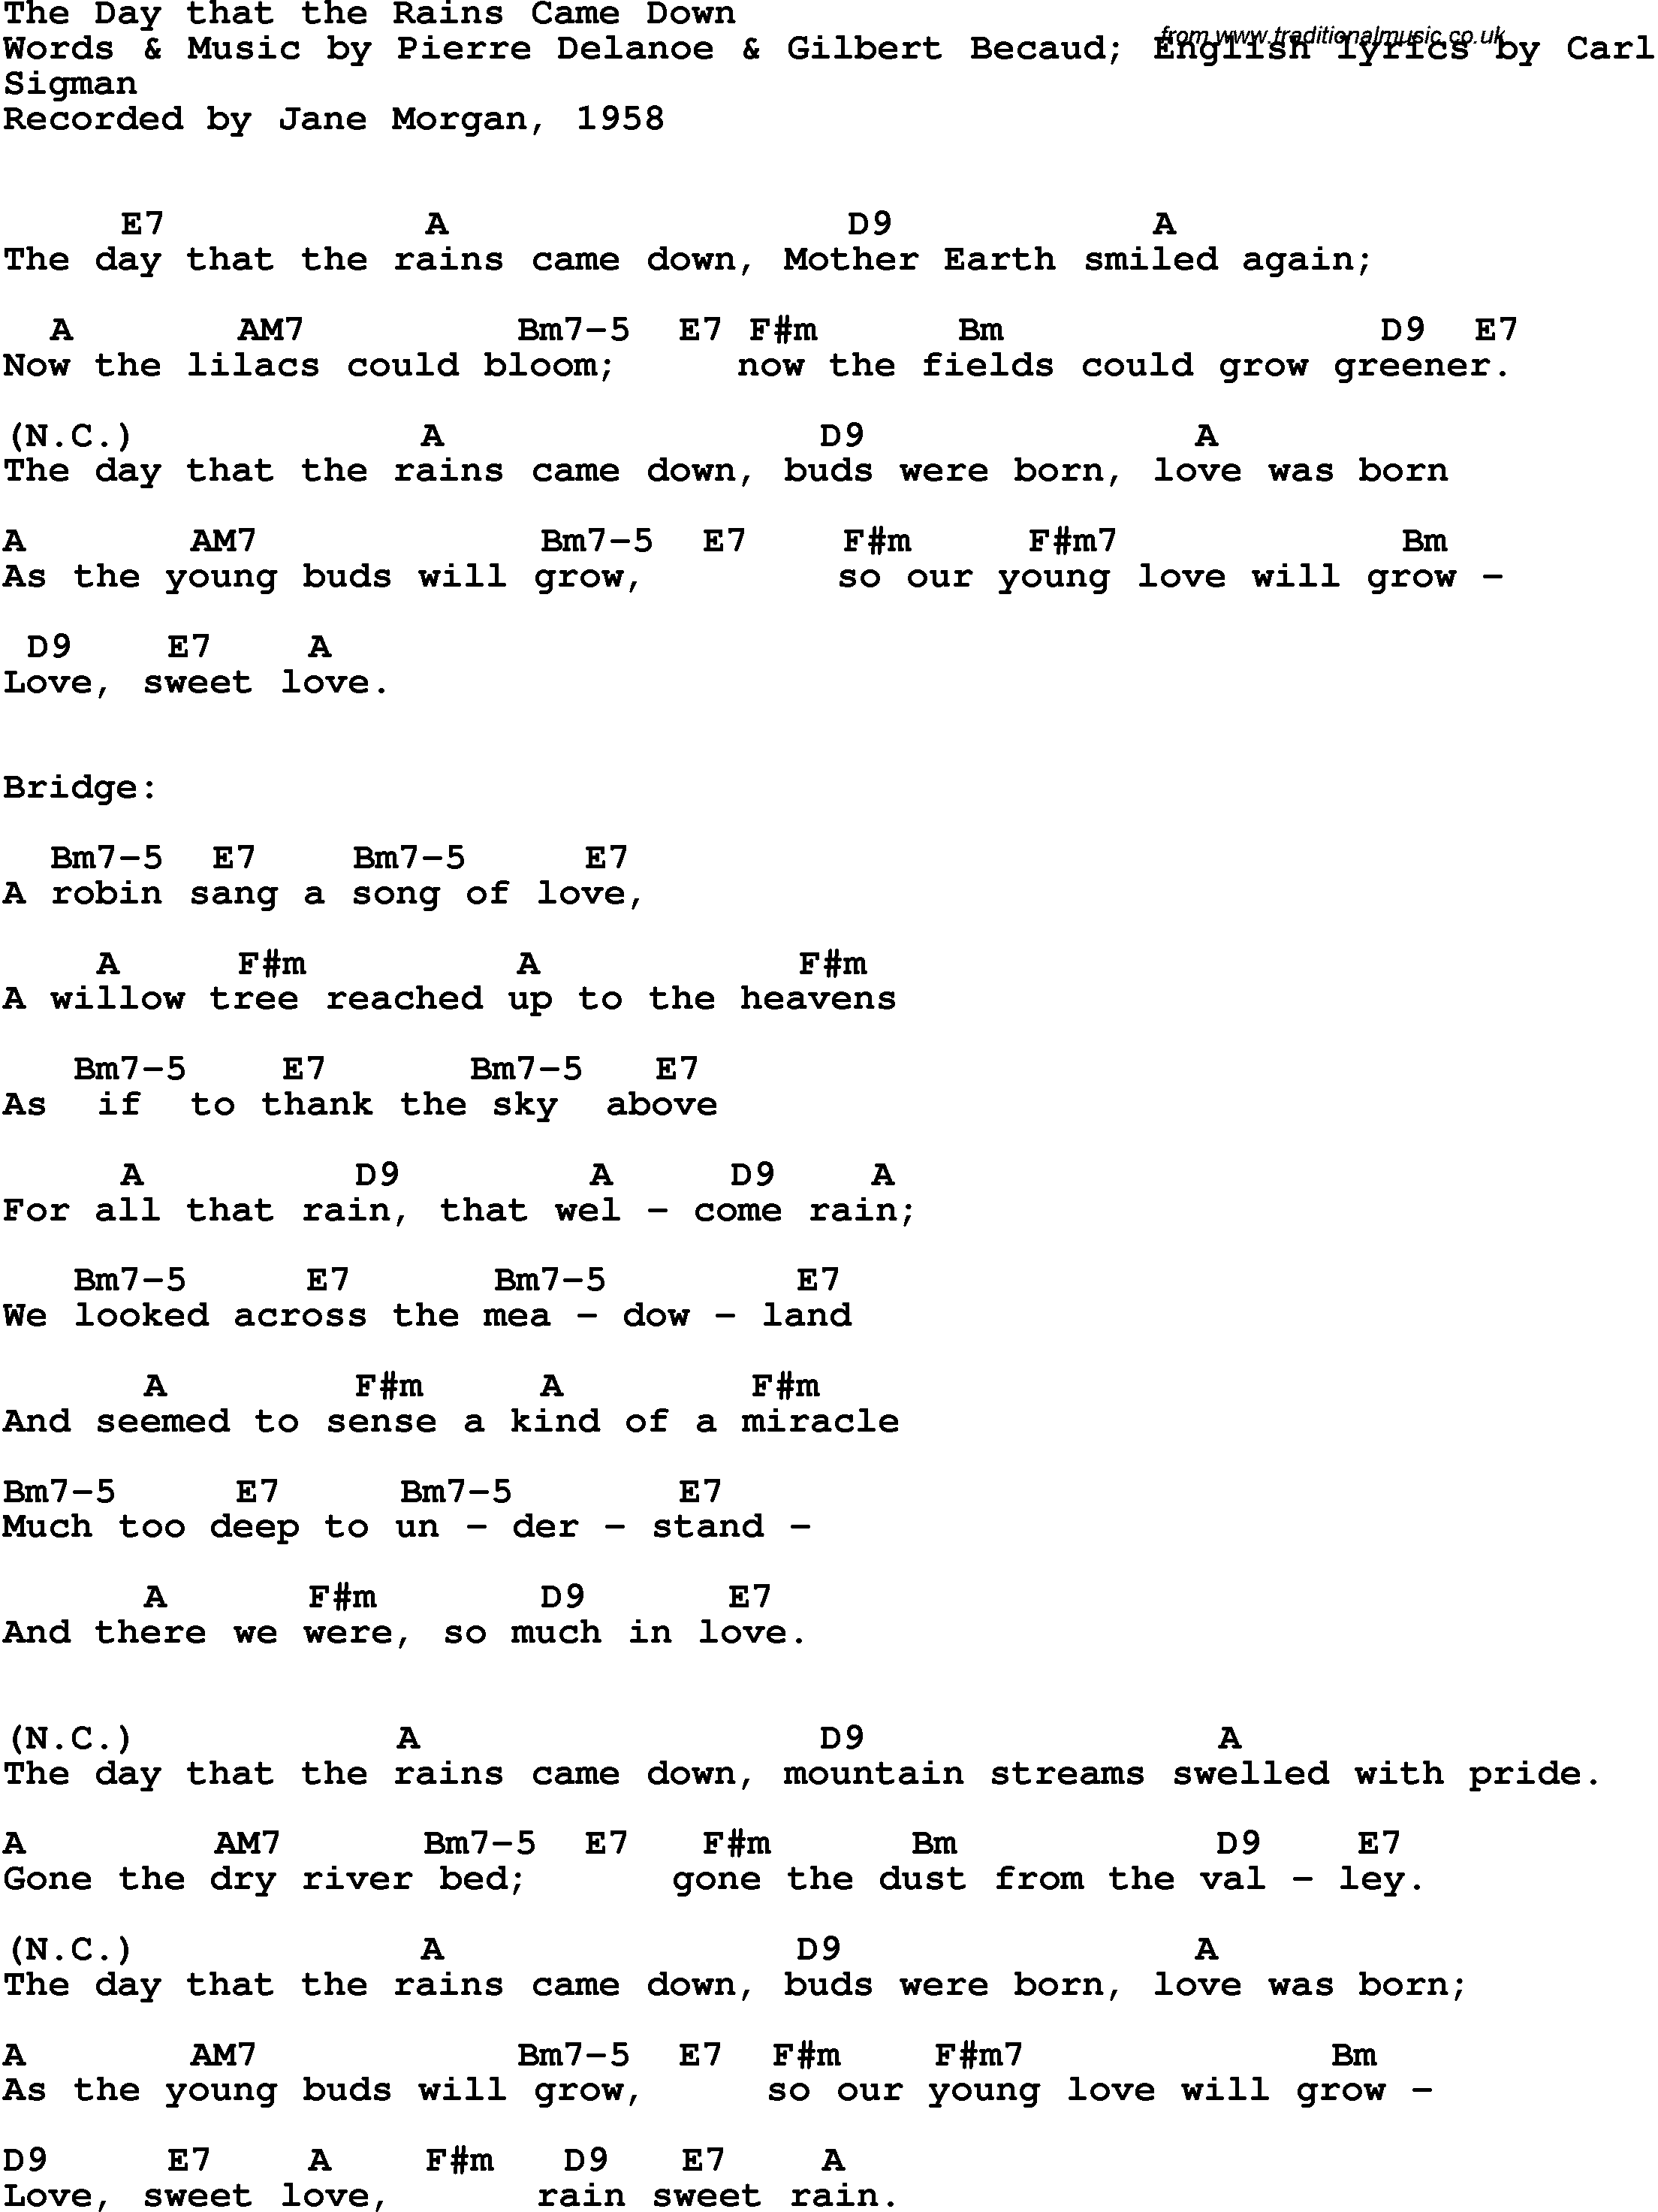 Song Lyrics with guitar chords for Day That The Rains Came Down, The - Jane Morgan, 1958